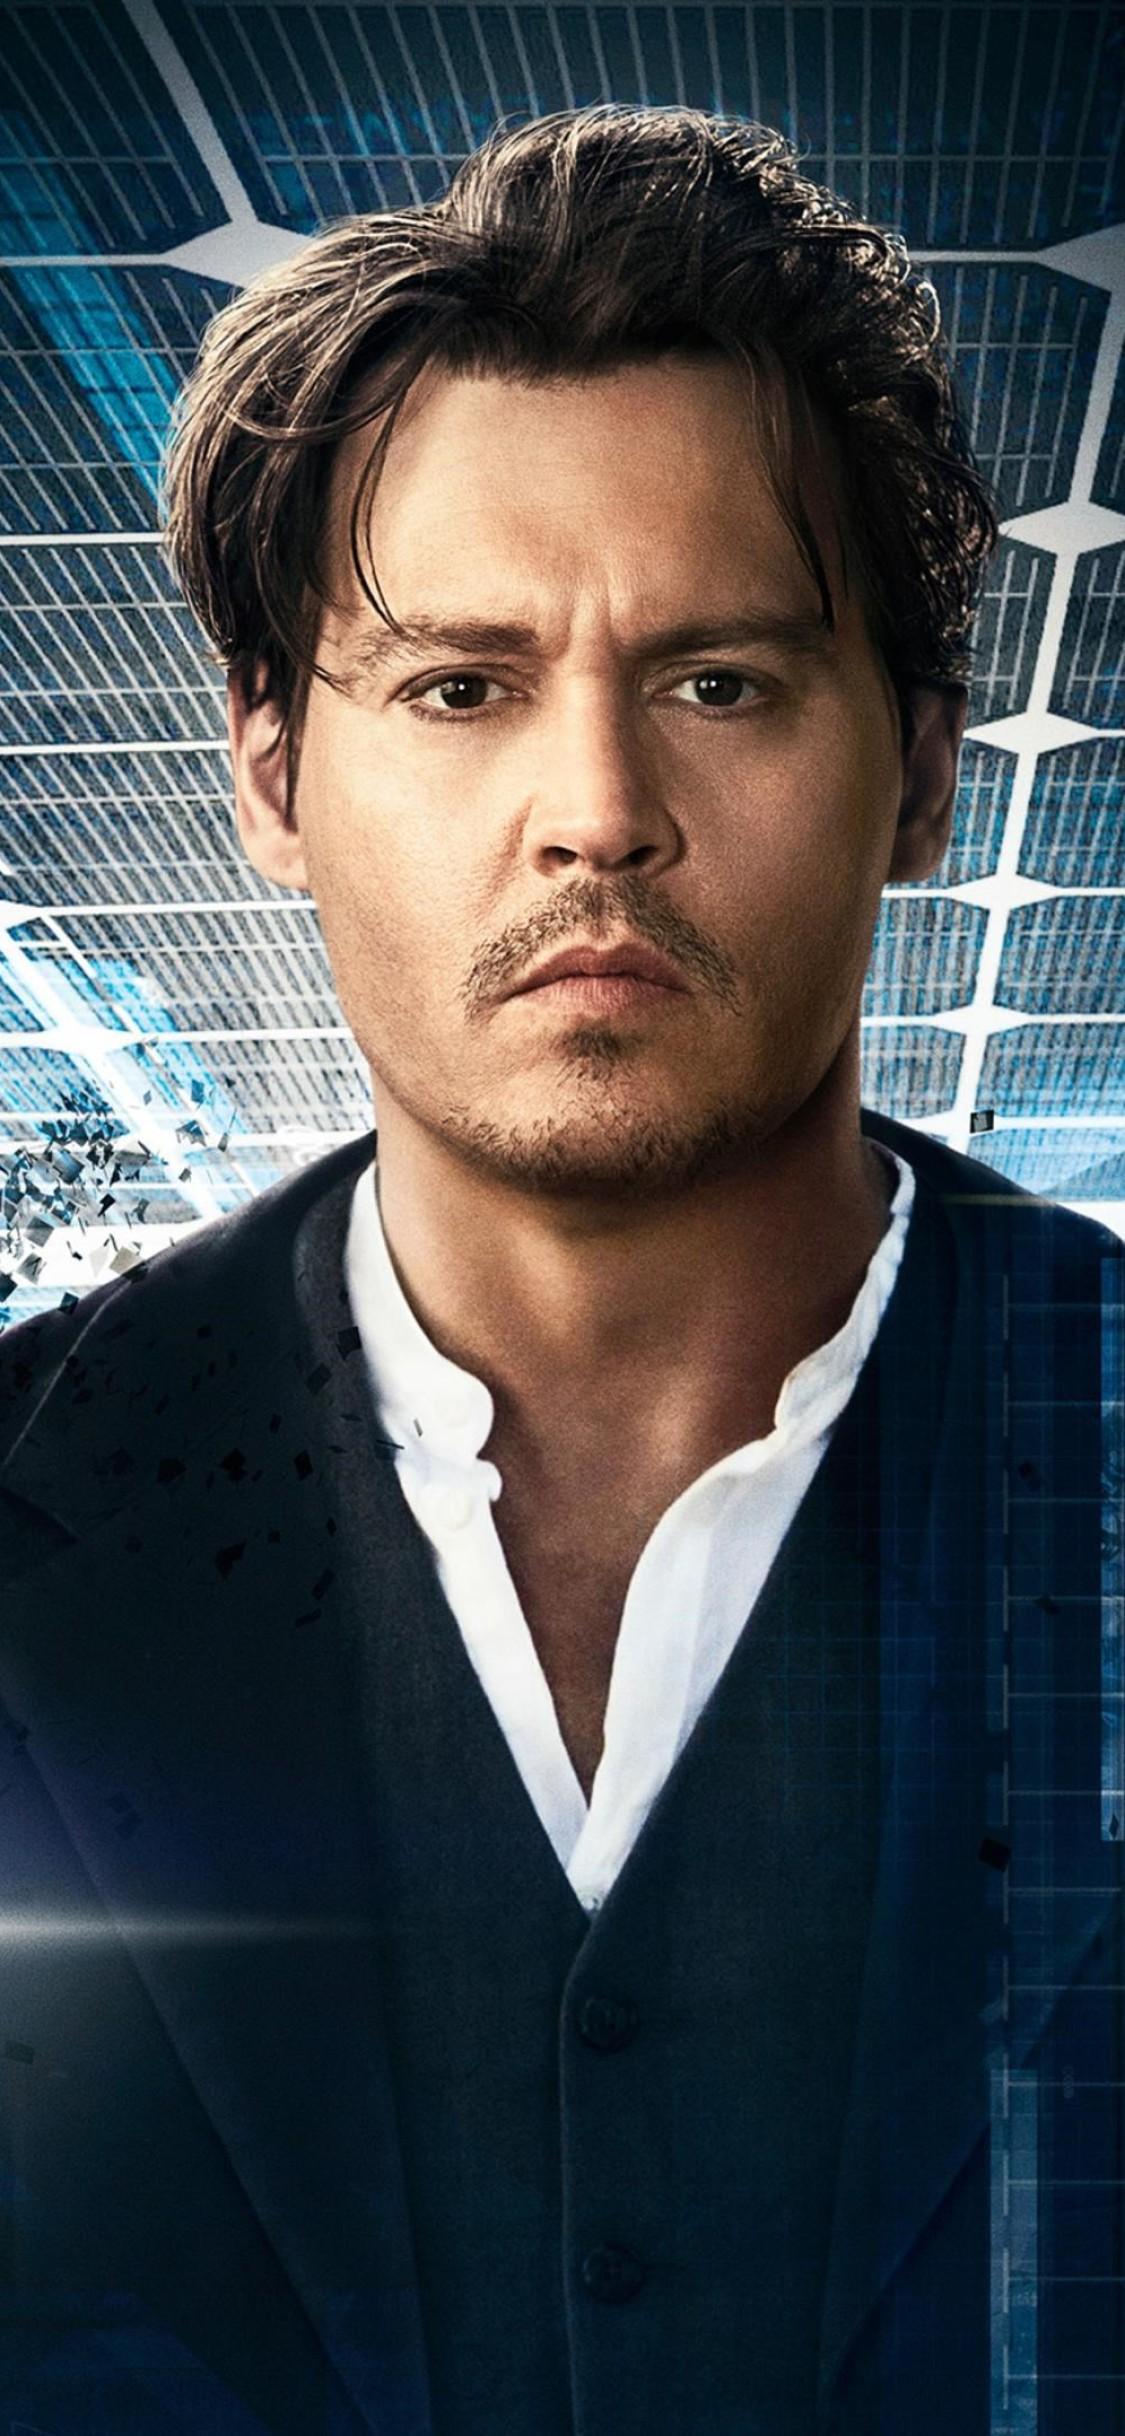 Johnny Depp In Transcendence iPhone XS, iPhone 10